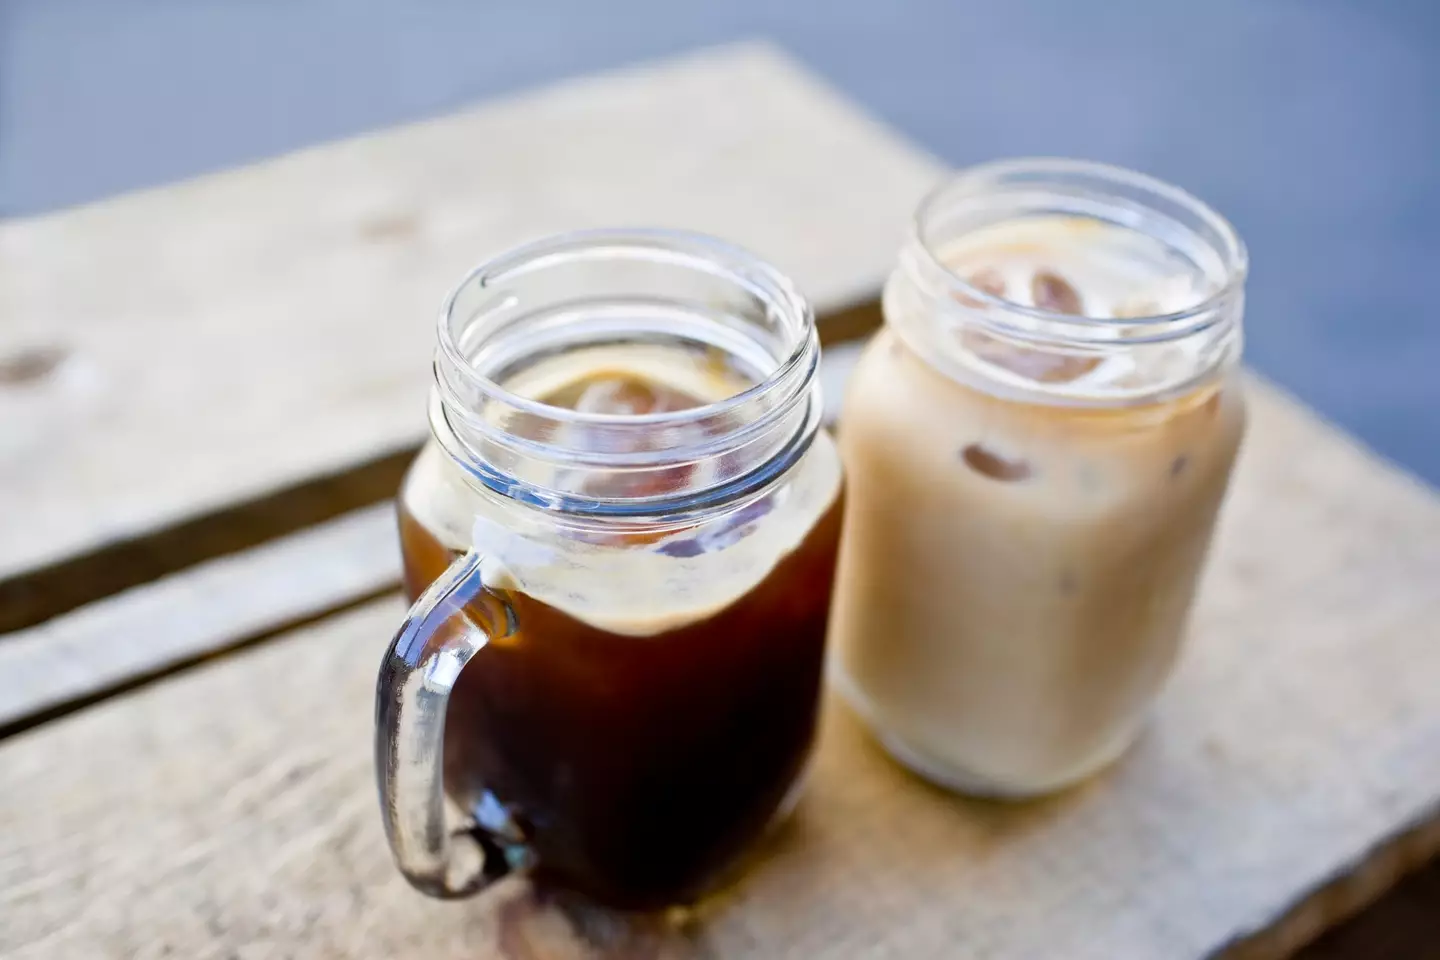 One cafe charged an 'absolutely crazy' amount for two iced coffees and some breakfast.